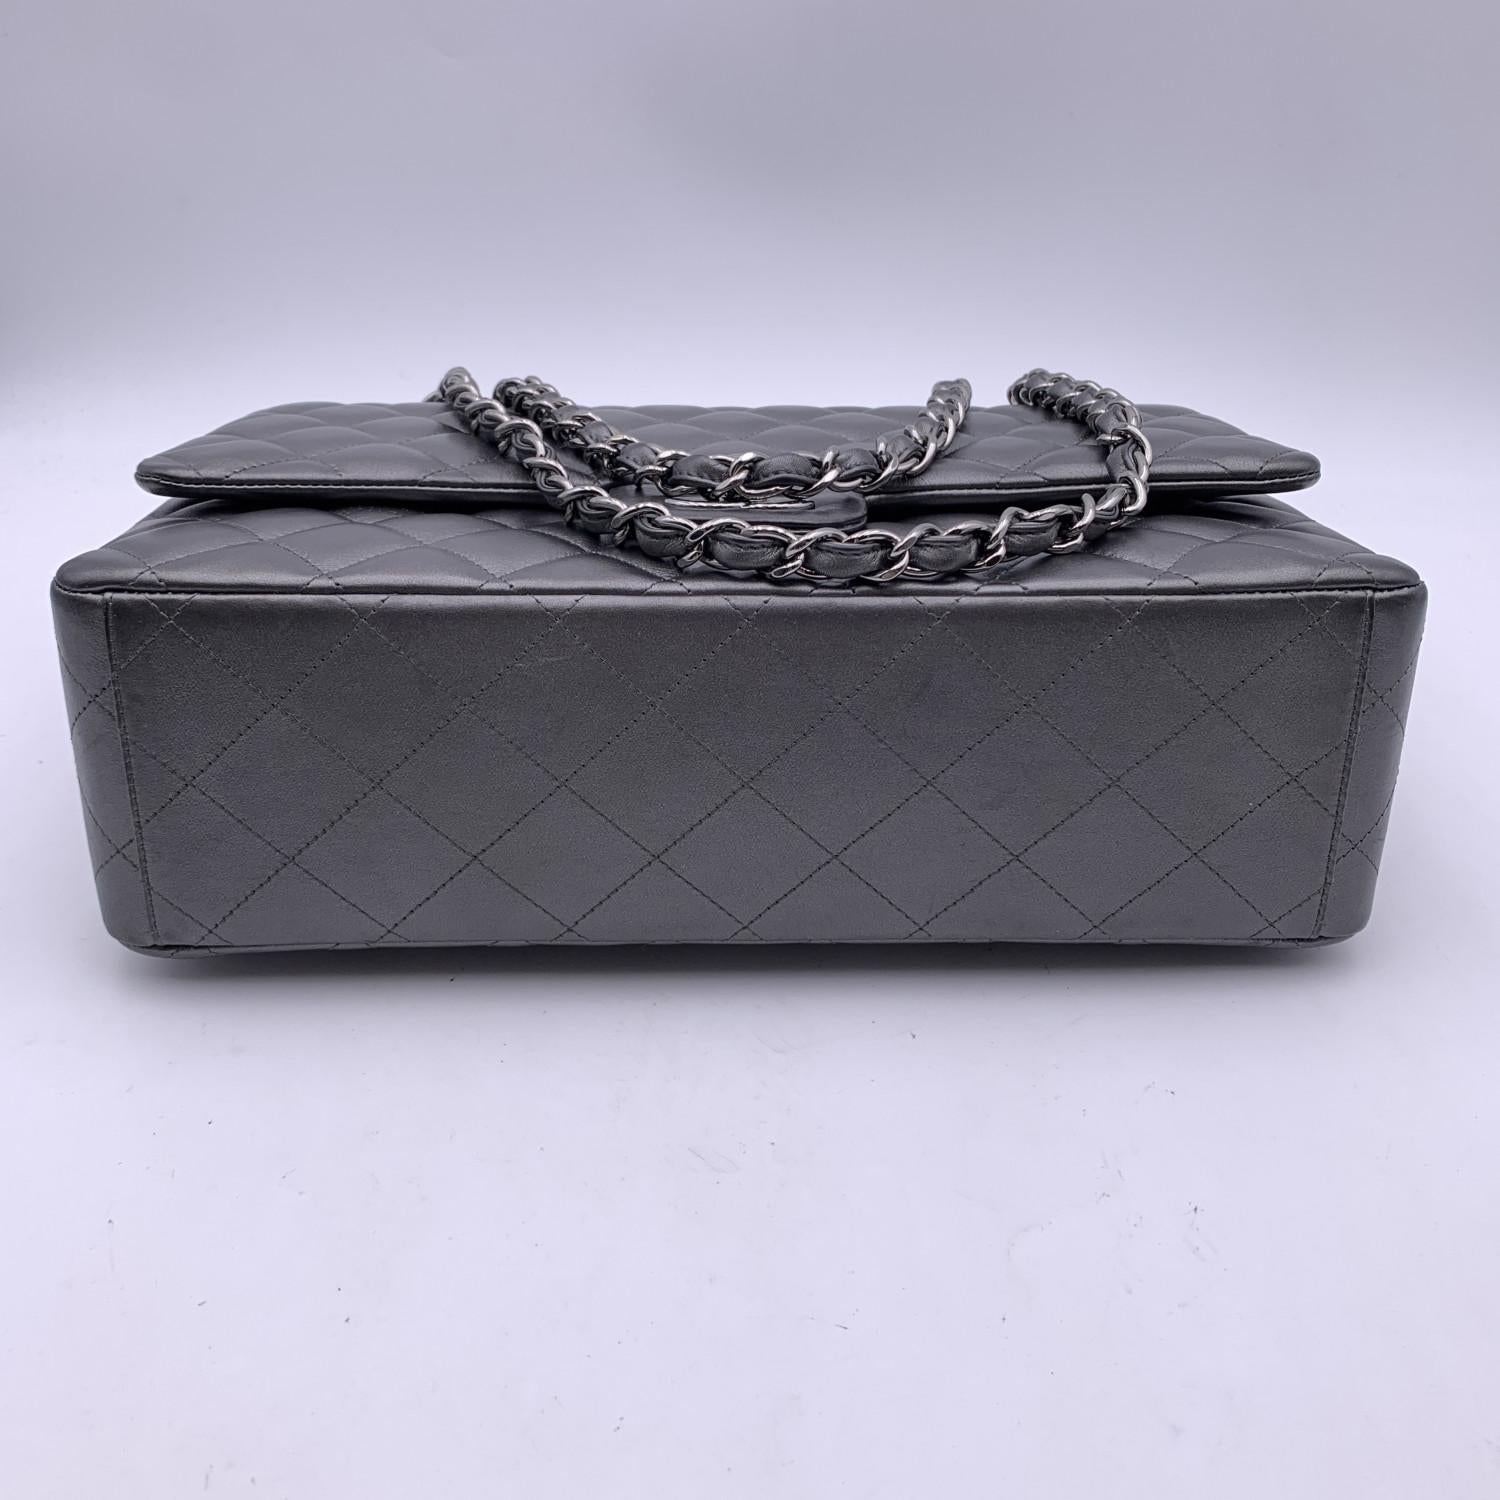 Chanel Grey Metallic Quilted Leather Classic Maxi Double Flap Bag 2